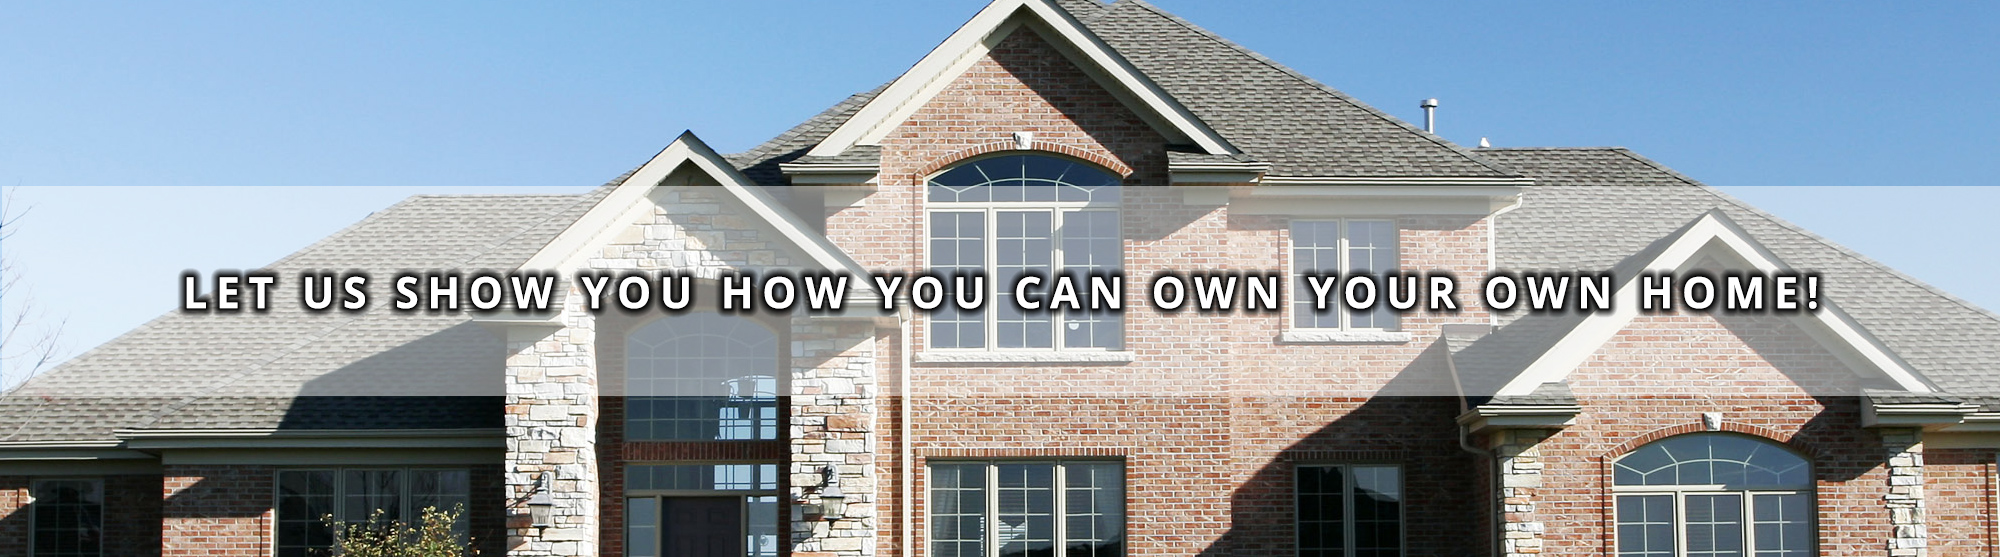 Let Us Show You How You Can Own Your Own Home!